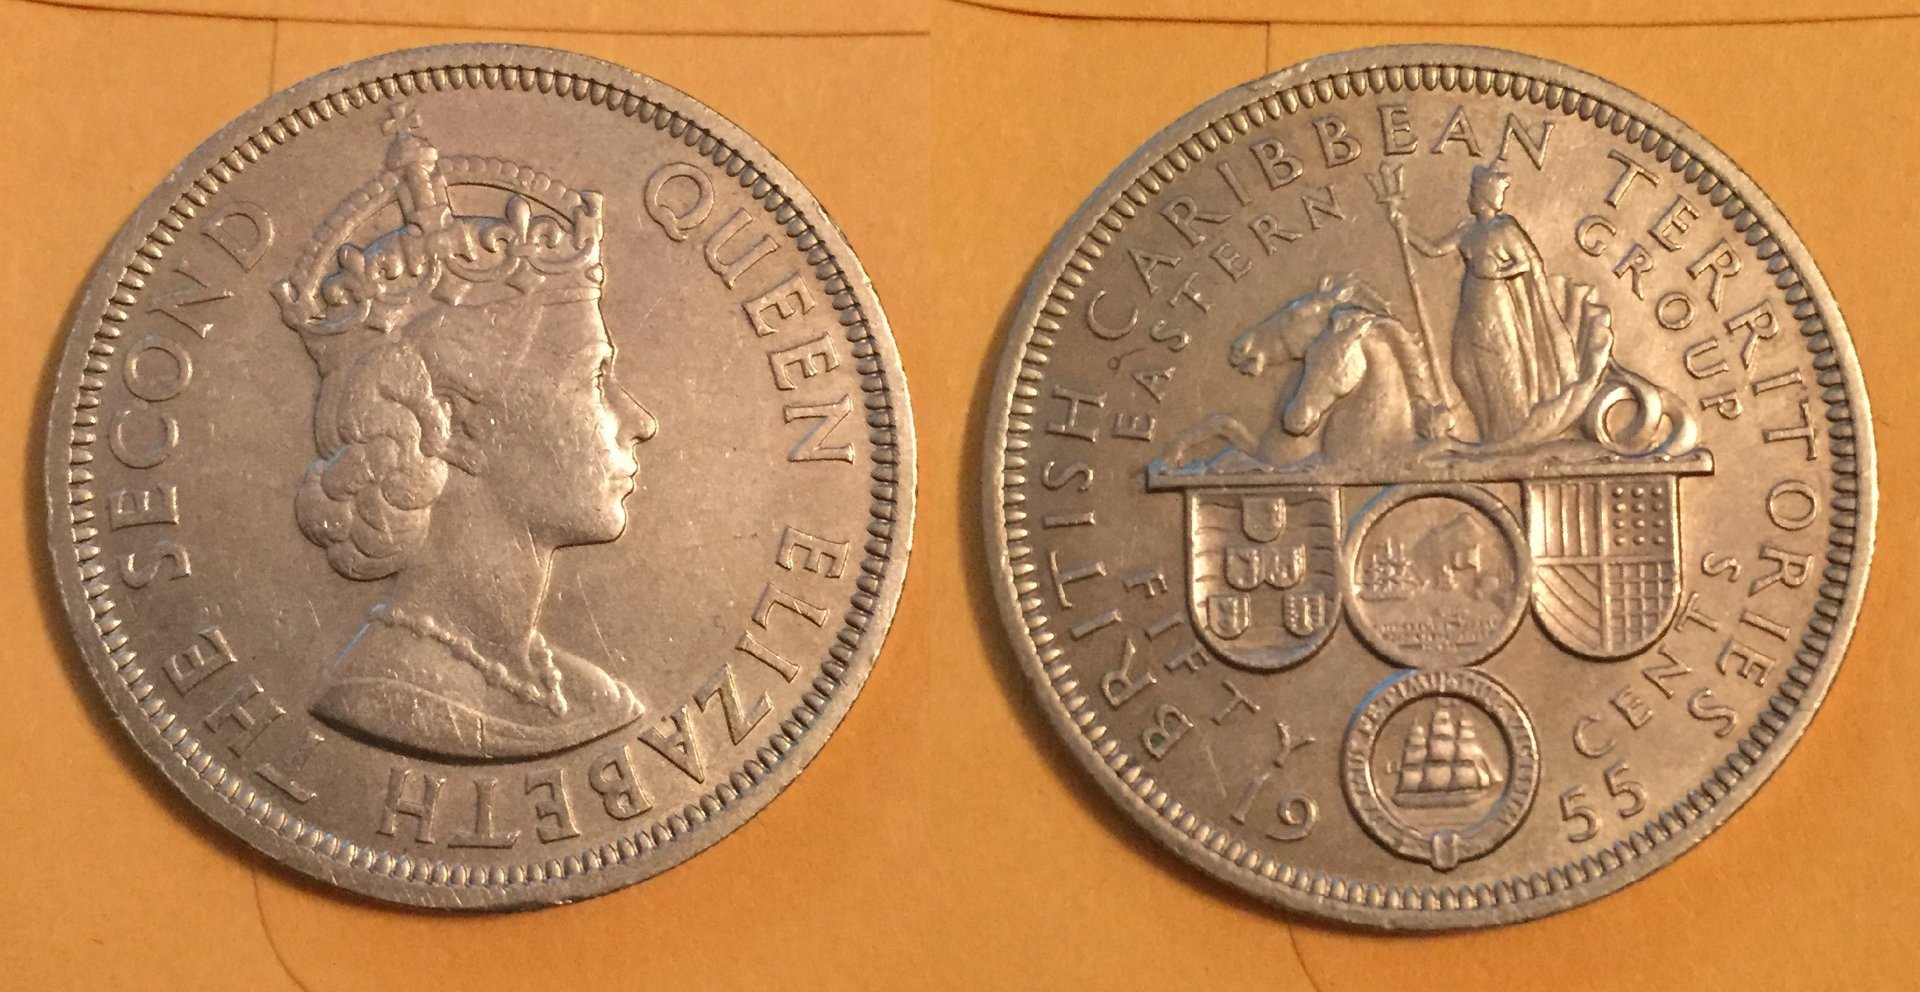 1955 50 Cents Combined.jpg